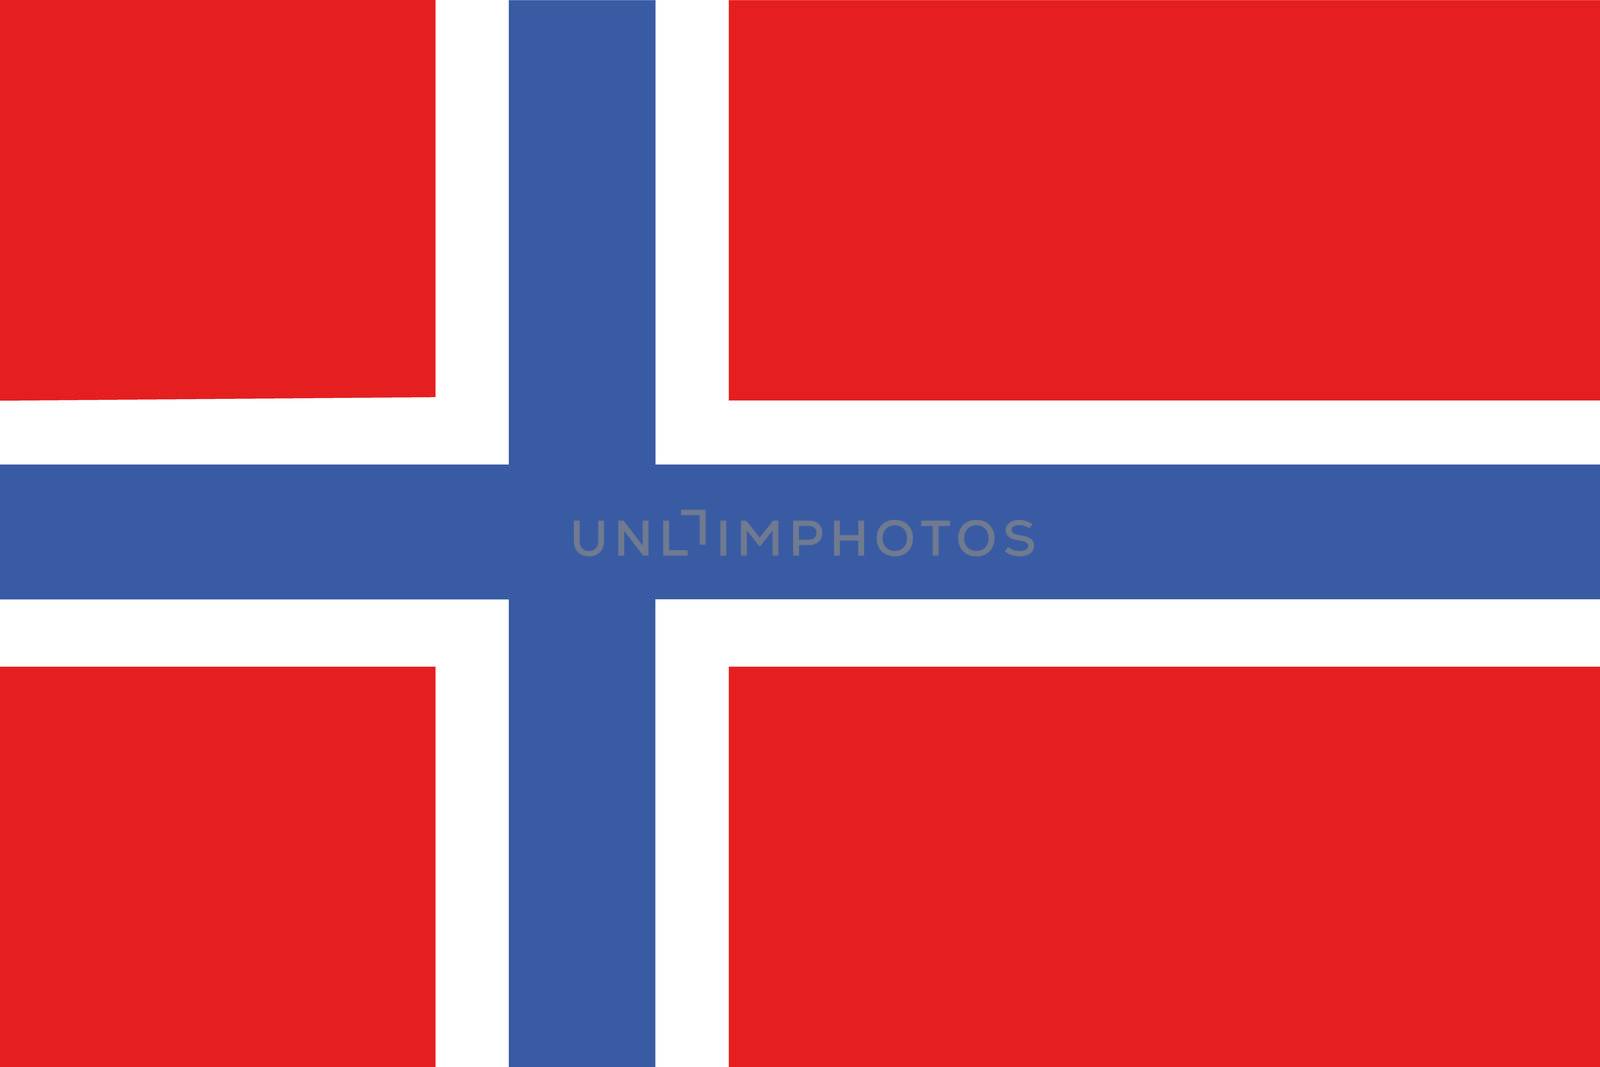 An illustration of the flag of Norway